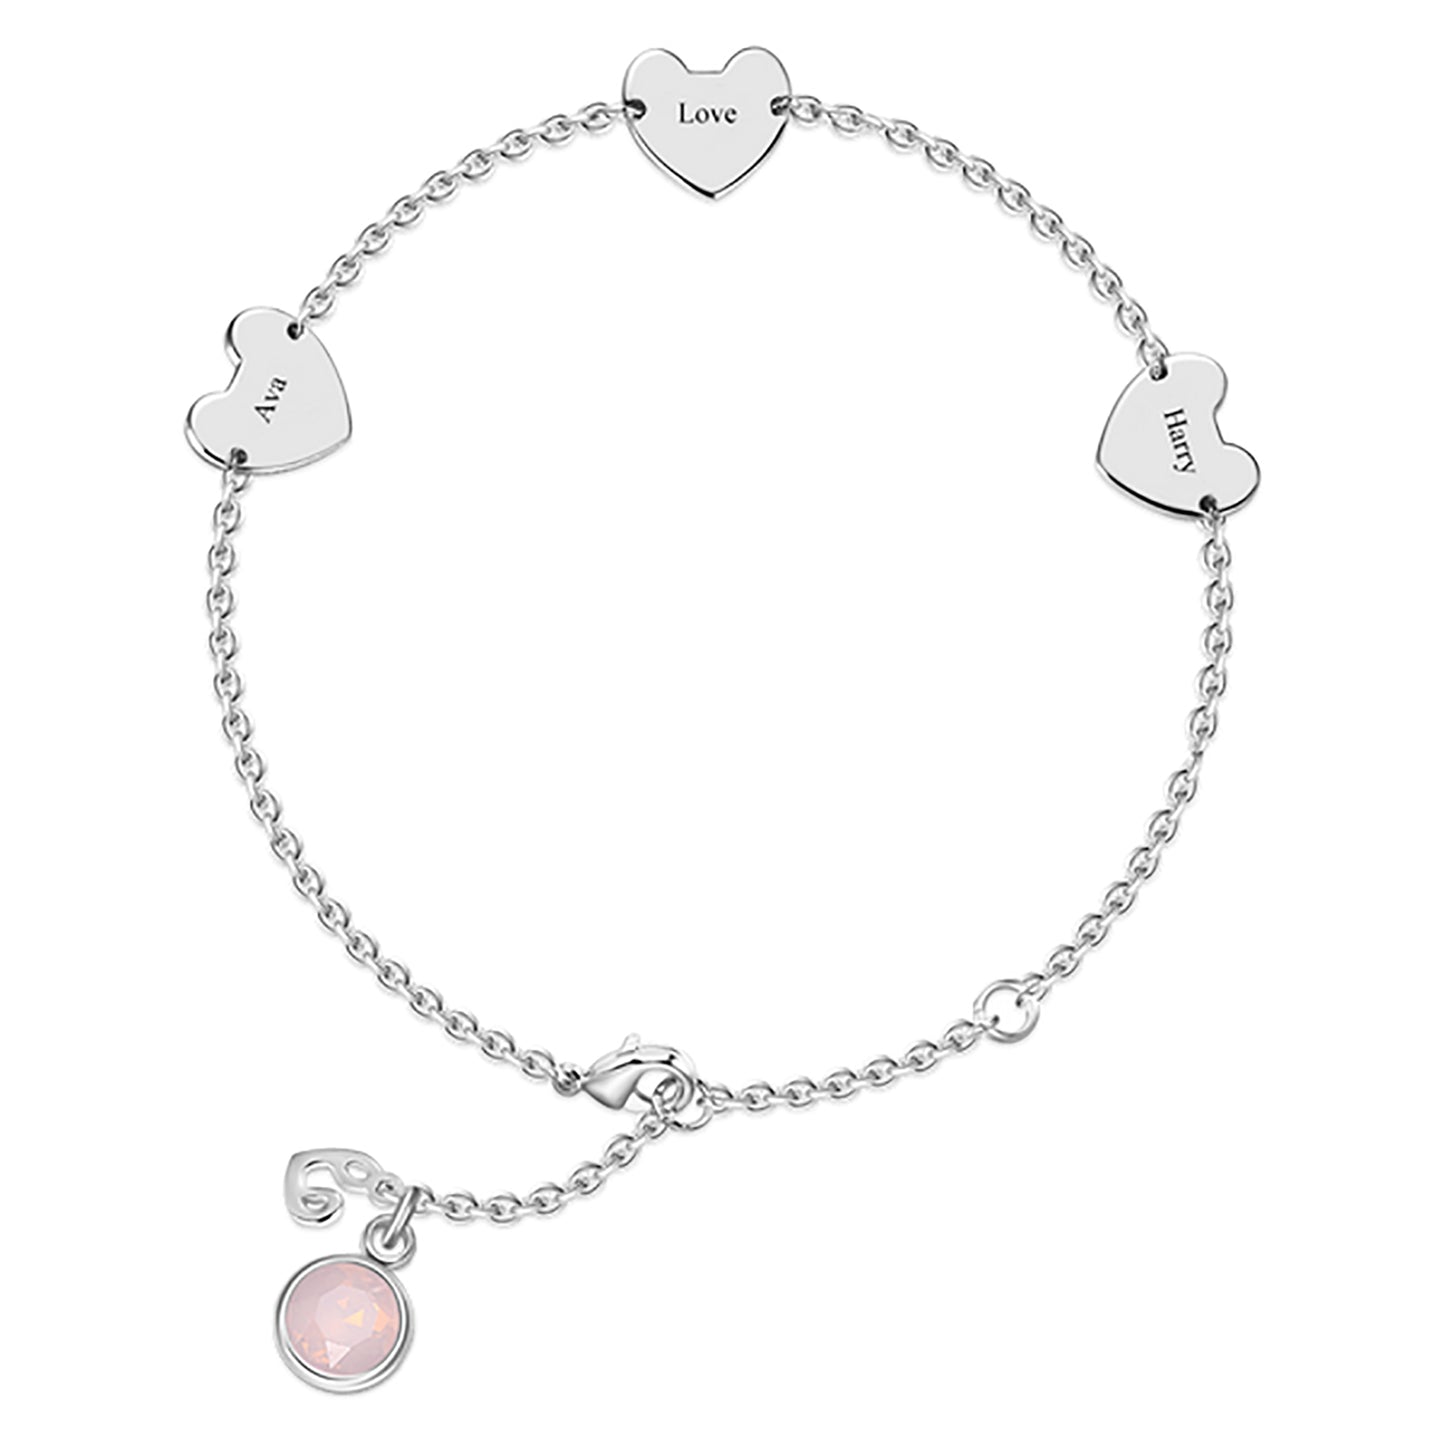 "Showcase Your Love with Our Engraved Three Hearts Bracelet - Customized with Birthstones and Length Adjustable for the Perfect Fit"